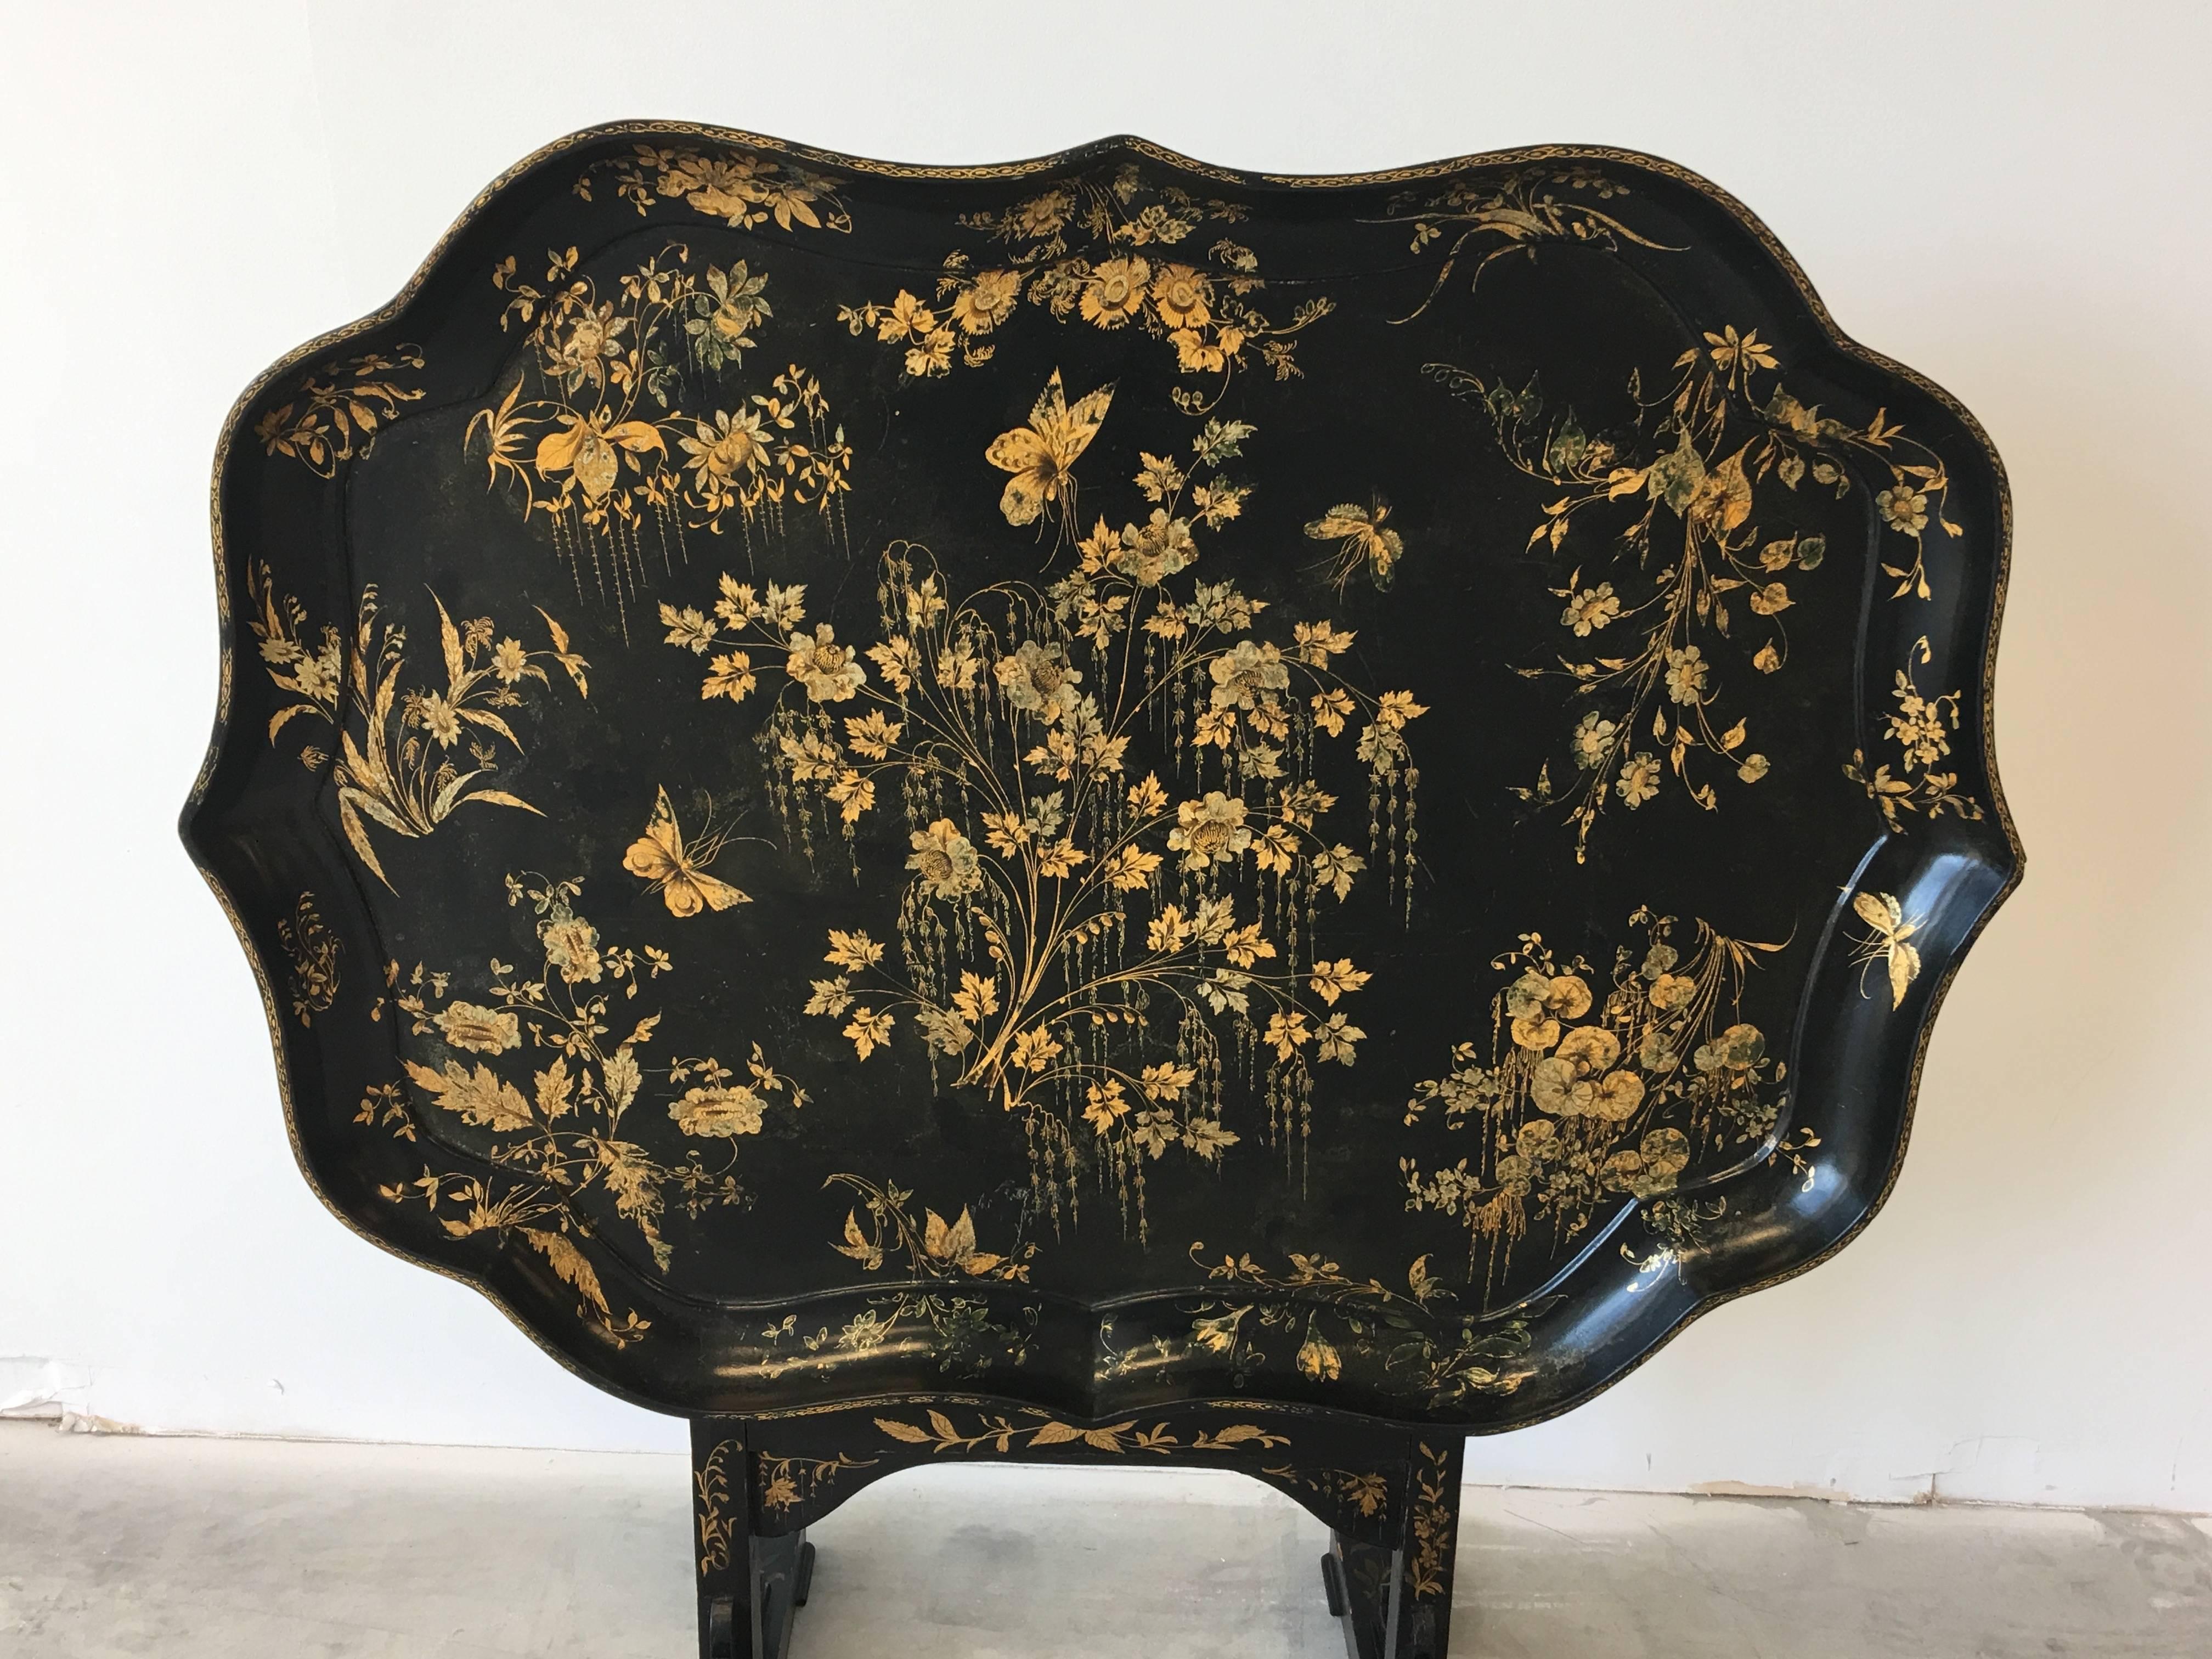 A fine, Japanned chinoiserie tilt-top table, decorated in gold and black with a floral design. Locking mechanism is excellent condition.